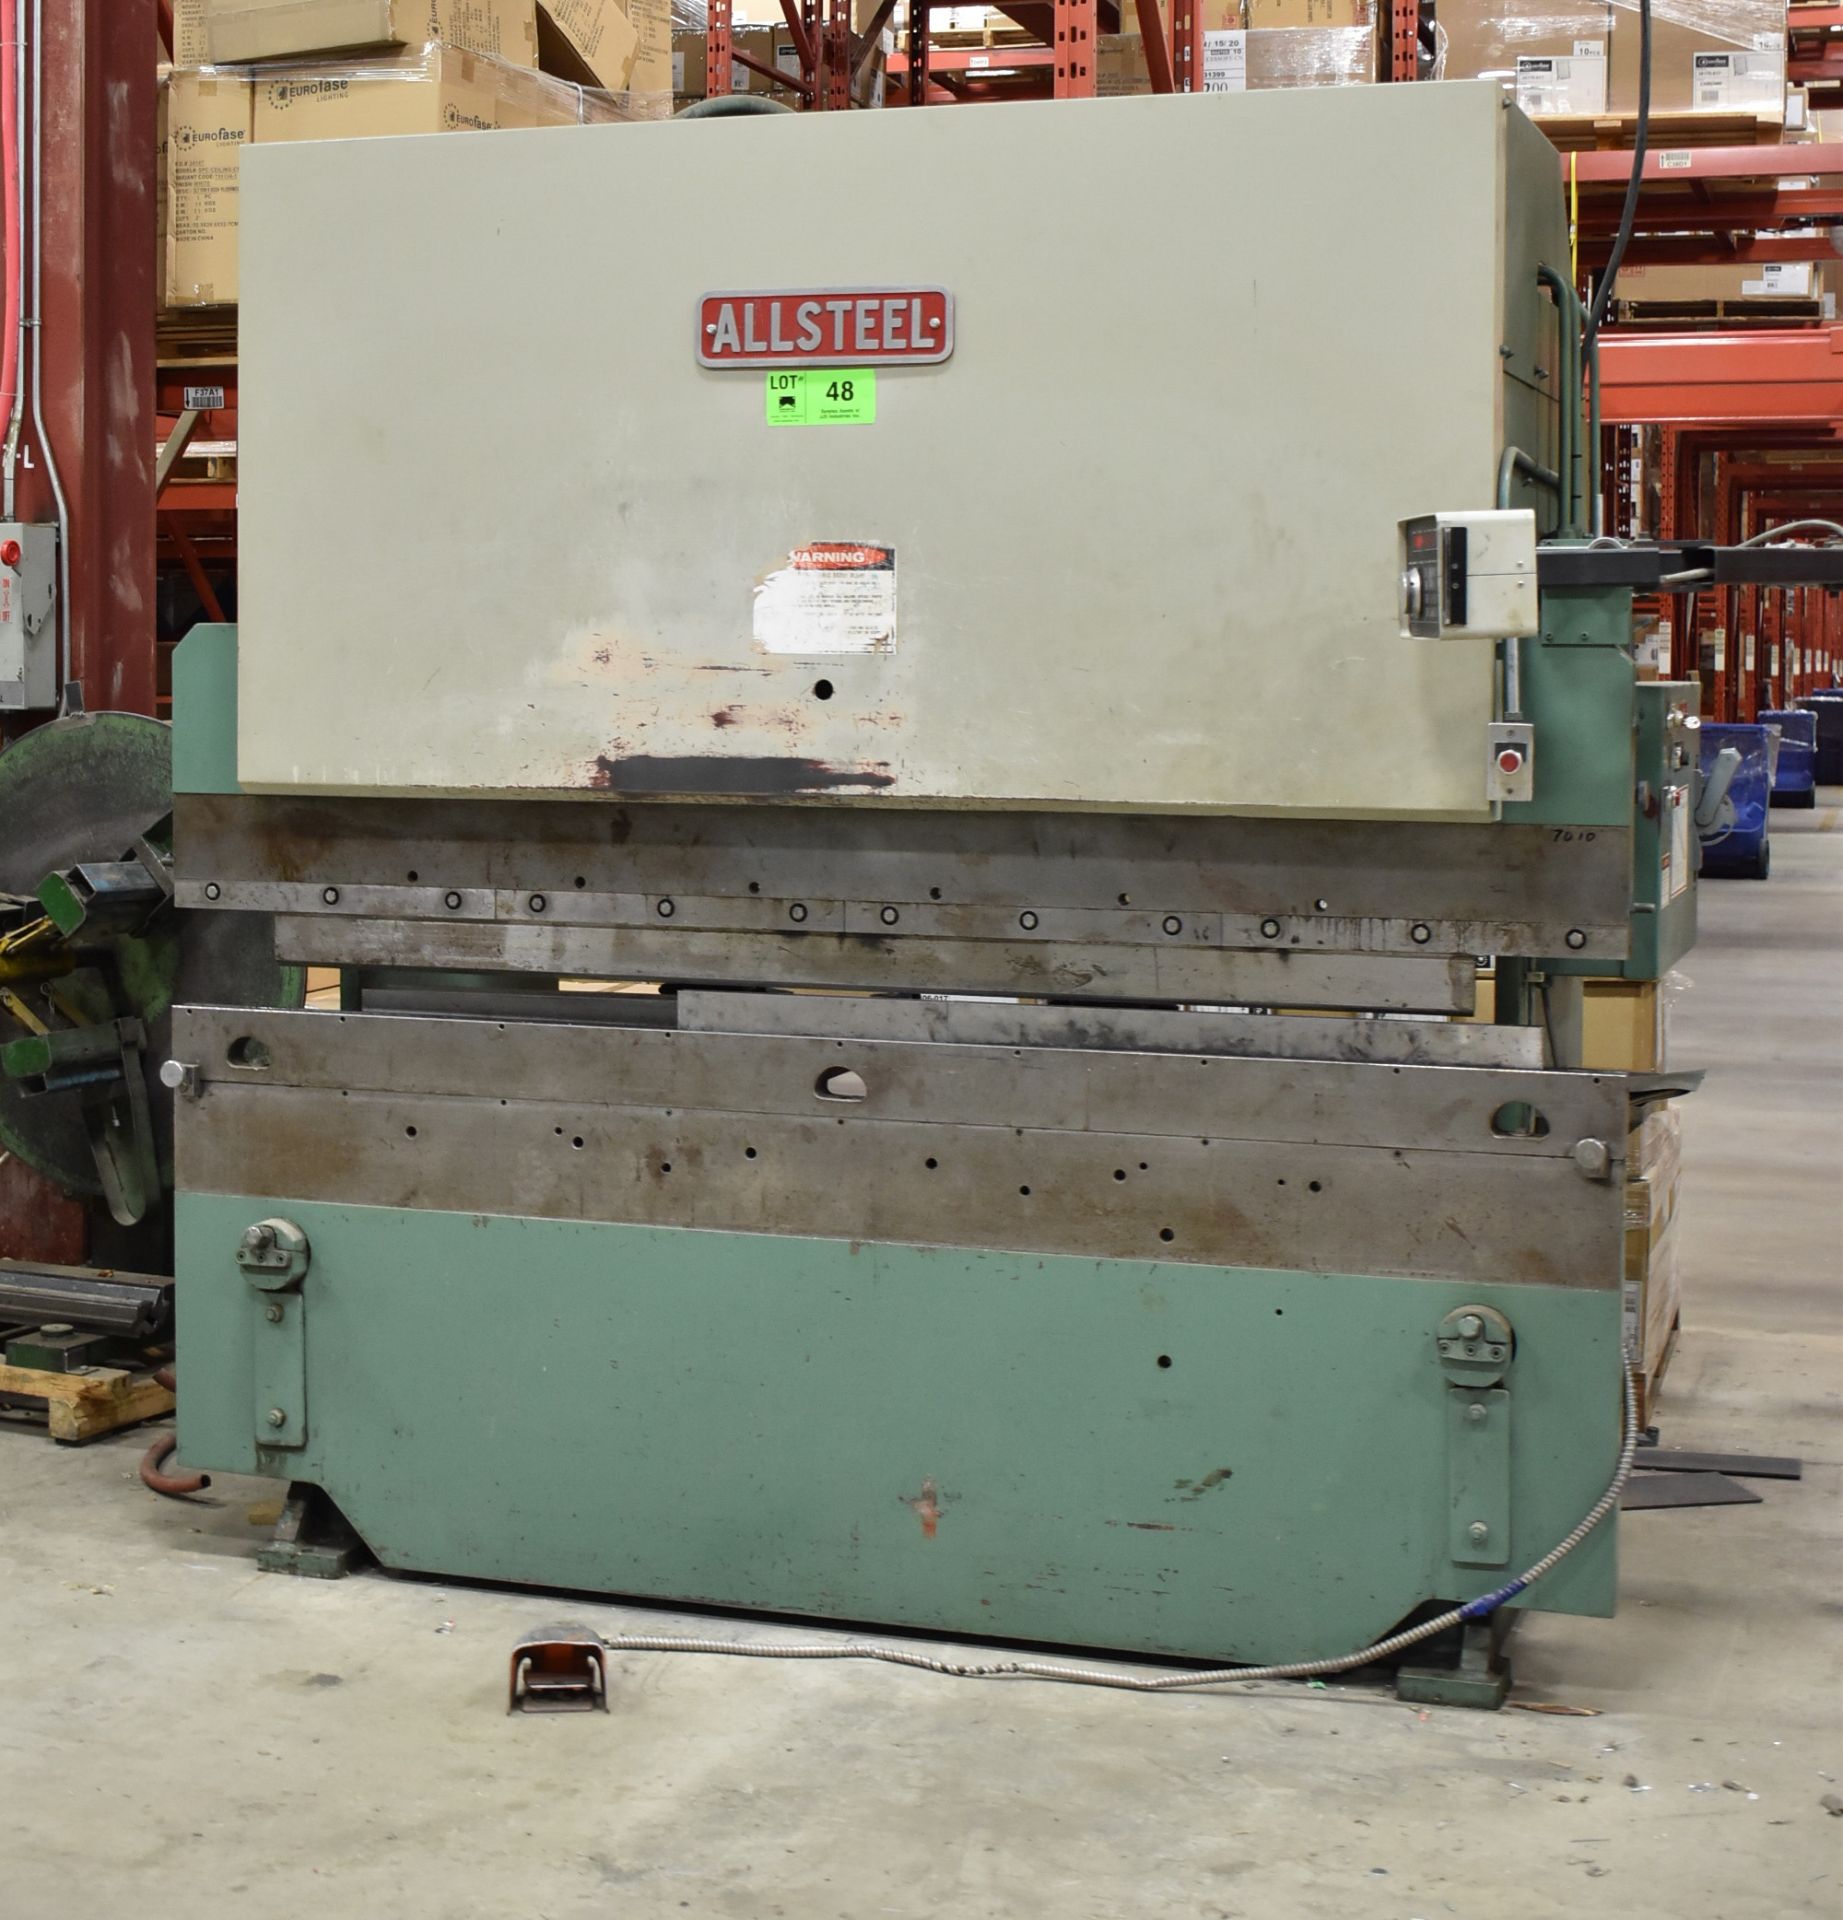 ALLSTEEL 45-8 45TON CAPACITY 8' MECHANICAL BRAKE PRESS WITH BACK GAUGE, UP TO 20GA MATERIAL - Image 2 of 7